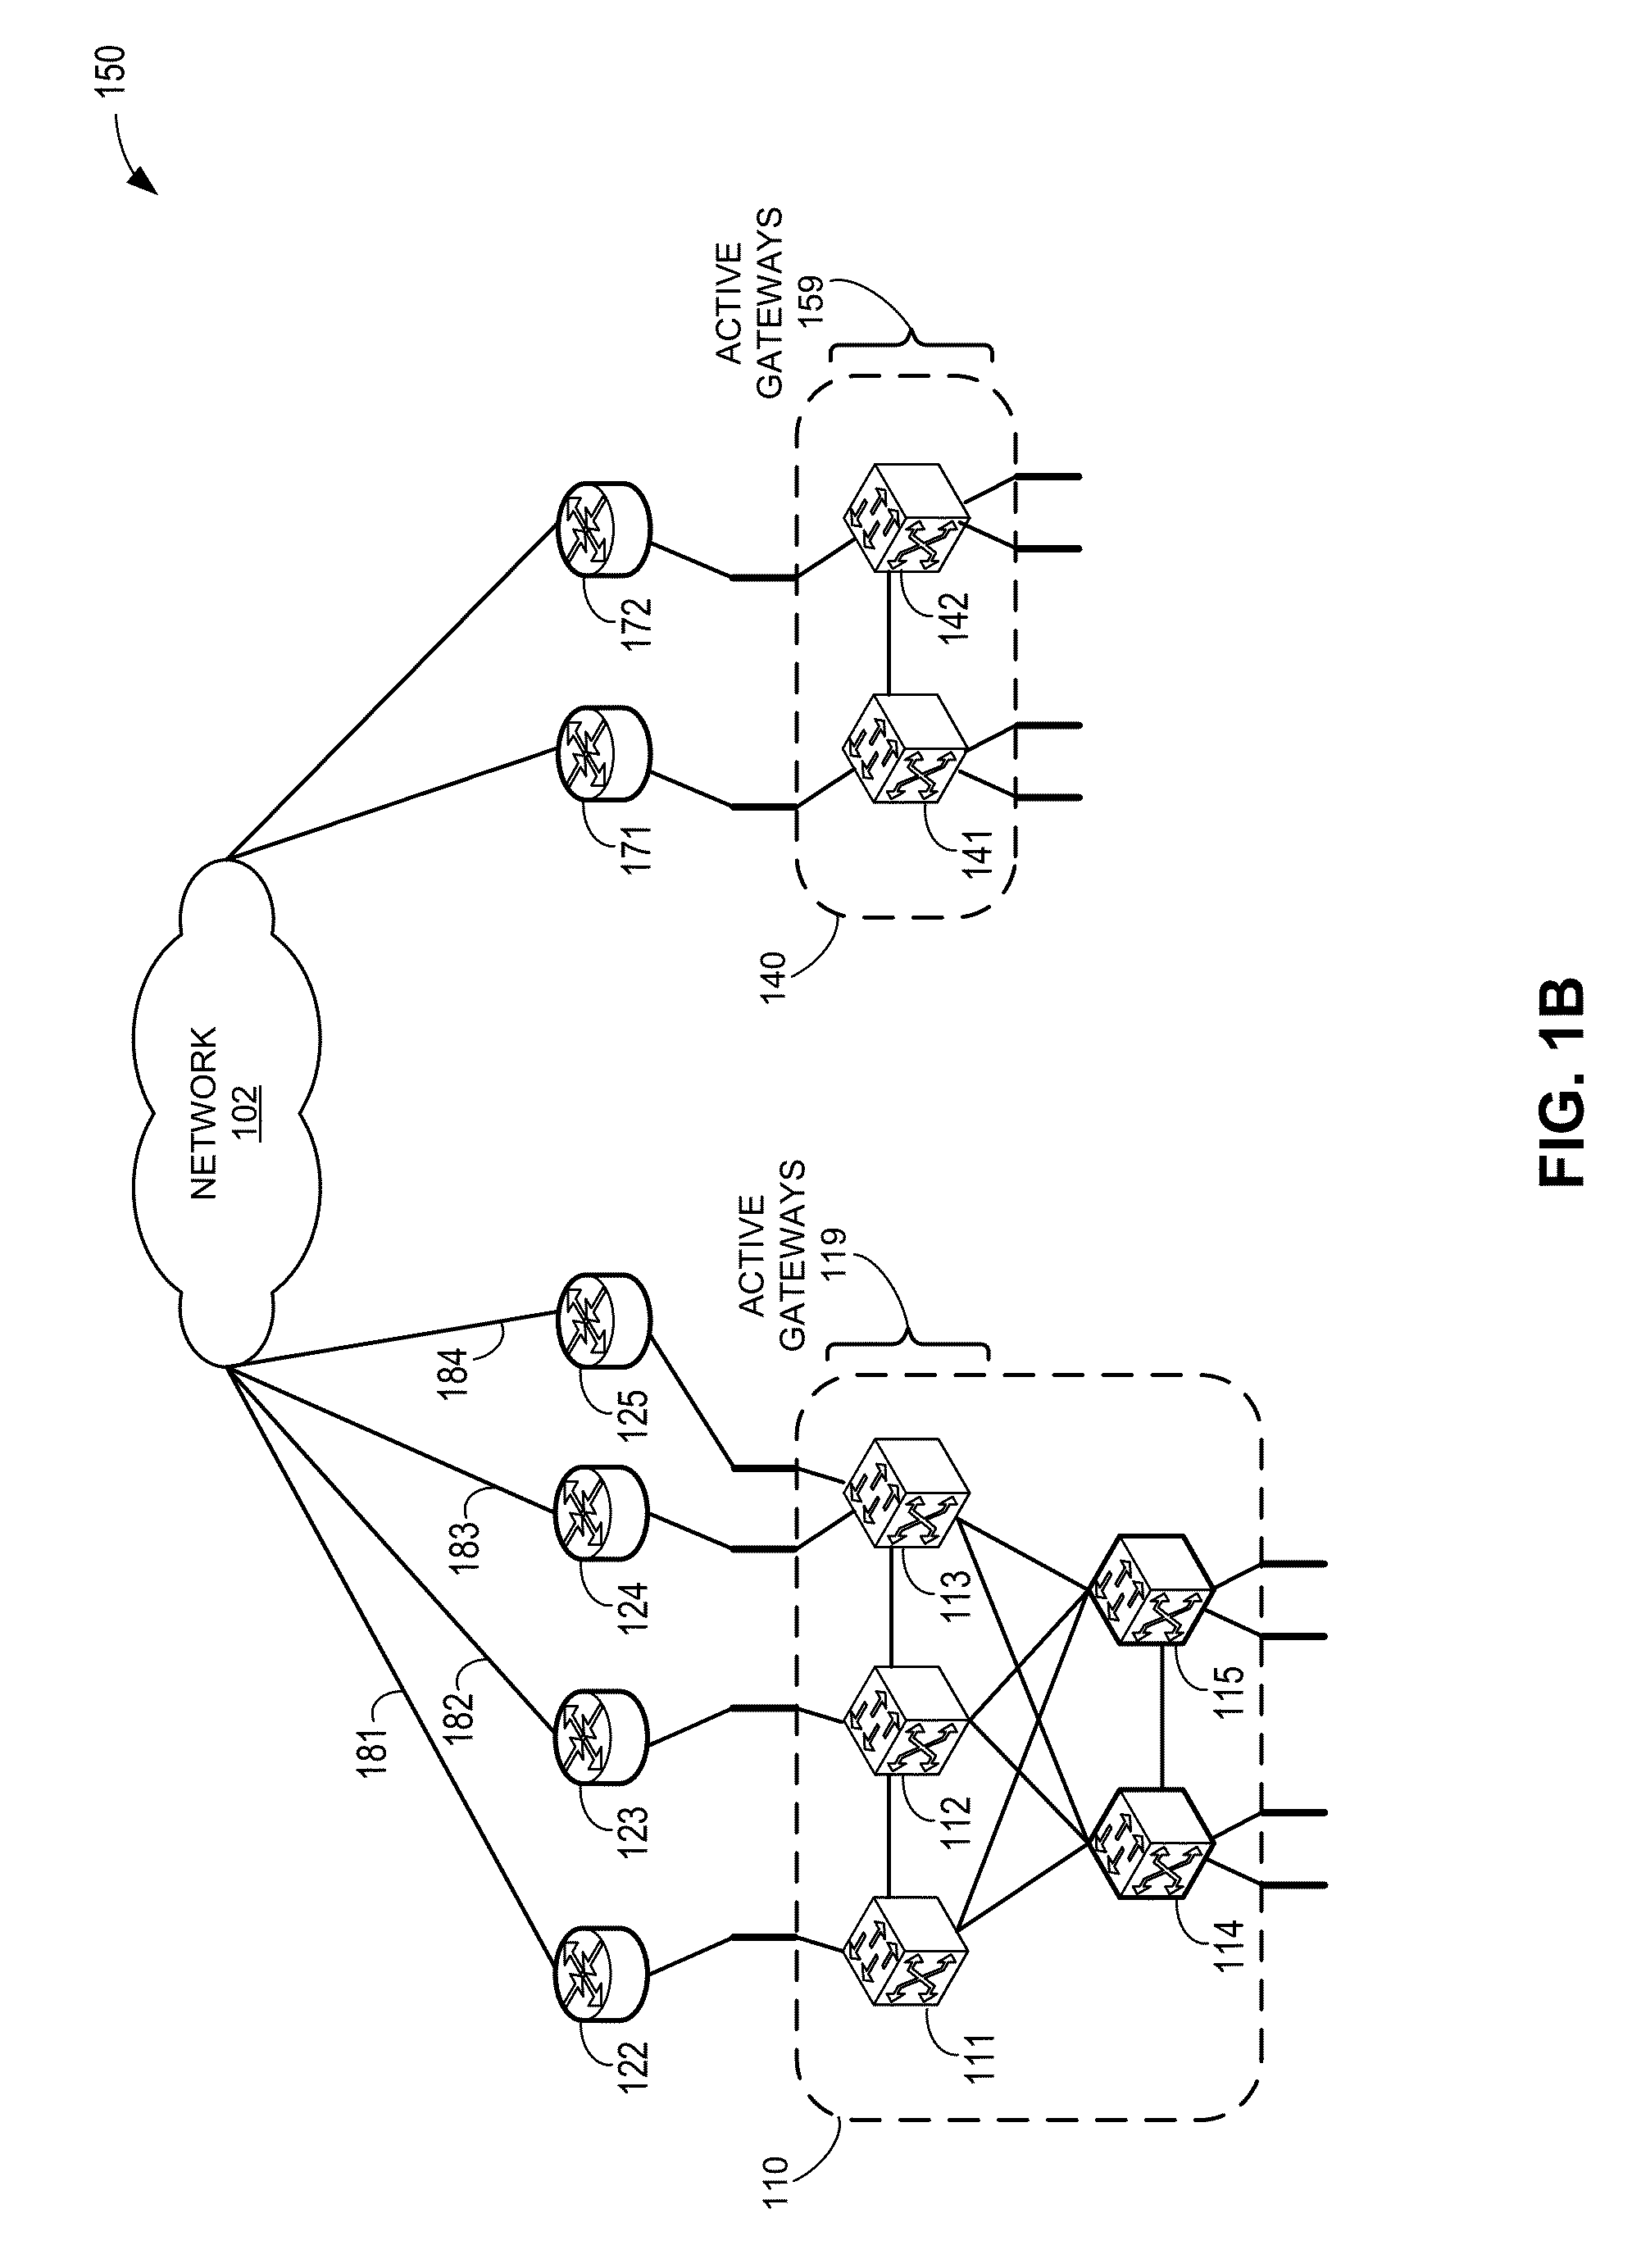 Distributed bidirectional forwarding detection protocol (d-bfd) for cluster of interconnected switches